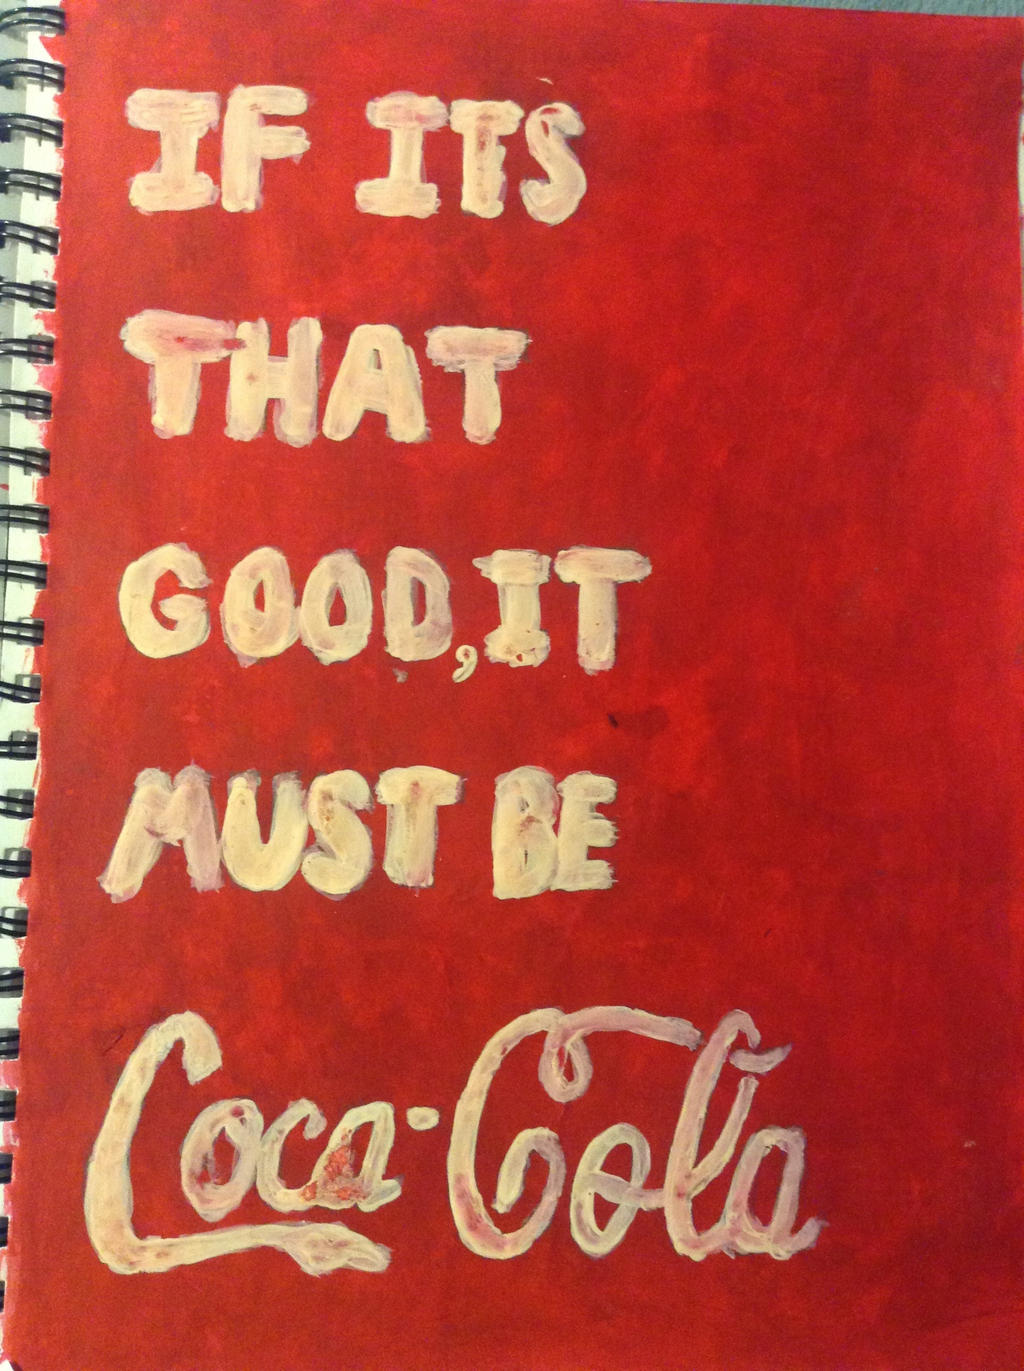 If its that good it must be coca cola